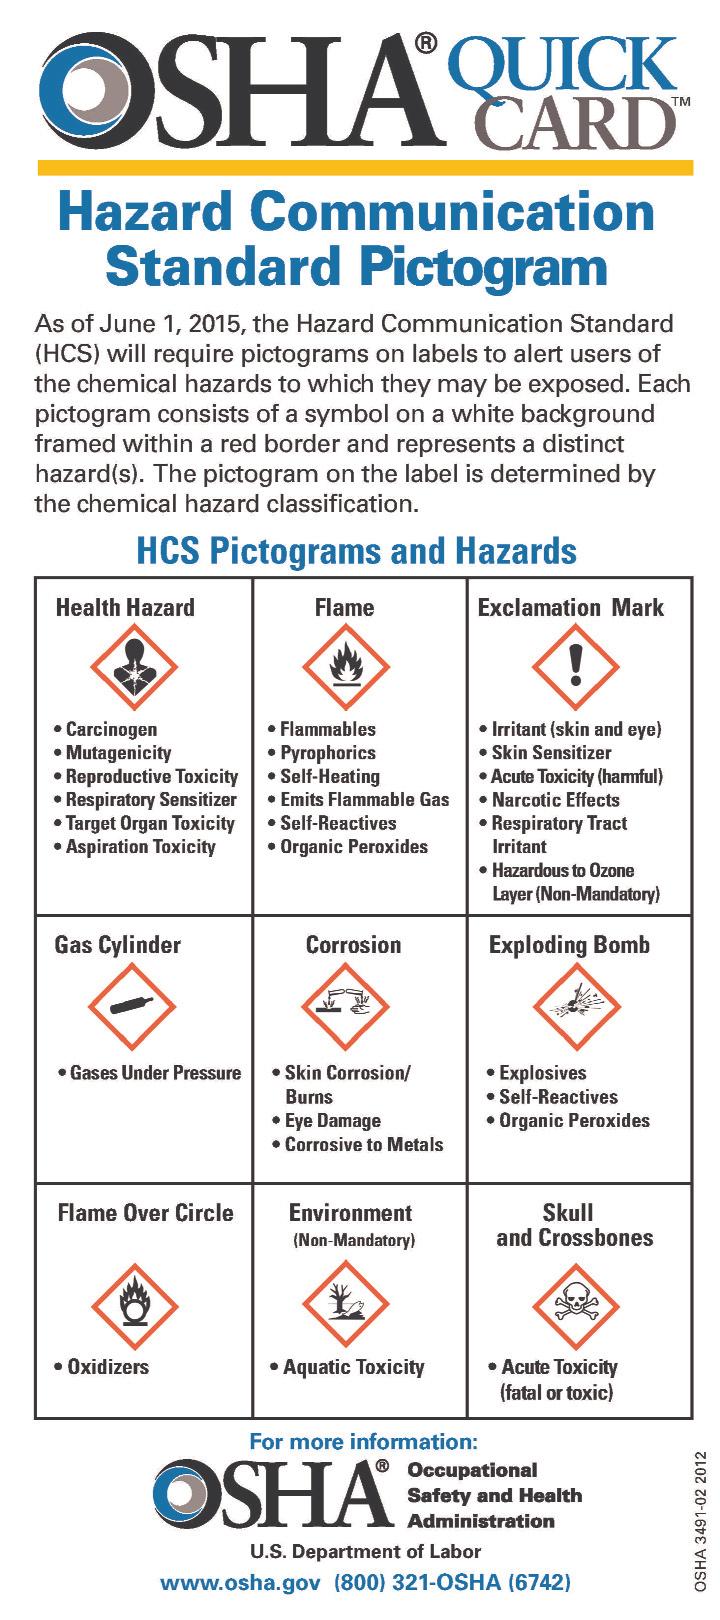 Example images of OSHA Quick Cards Hazard Communicaton Safety Data Sheets The Hazard Communication Standard (HCS) requires chemical manufacturers, distributors, or importers to provide Safety Data